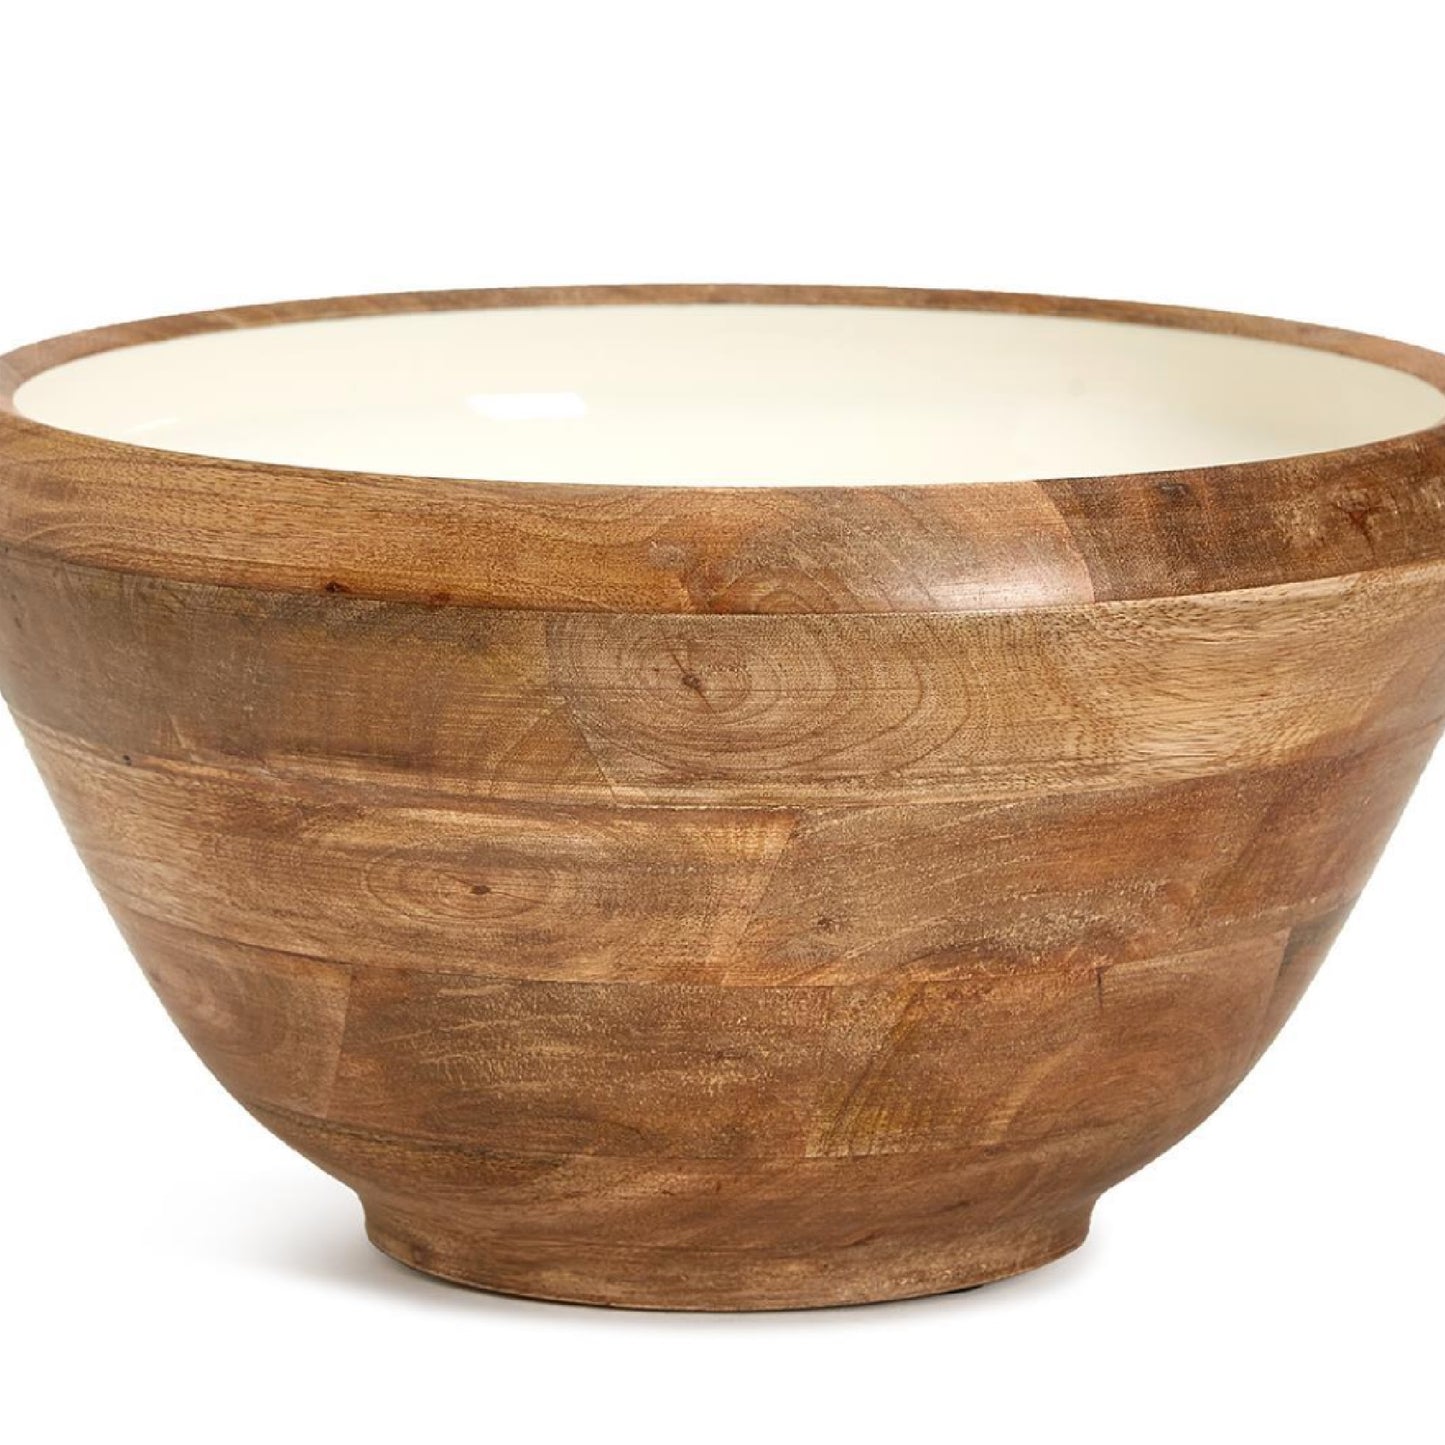 LARGE HAND CRAFTED WOOD BOWL